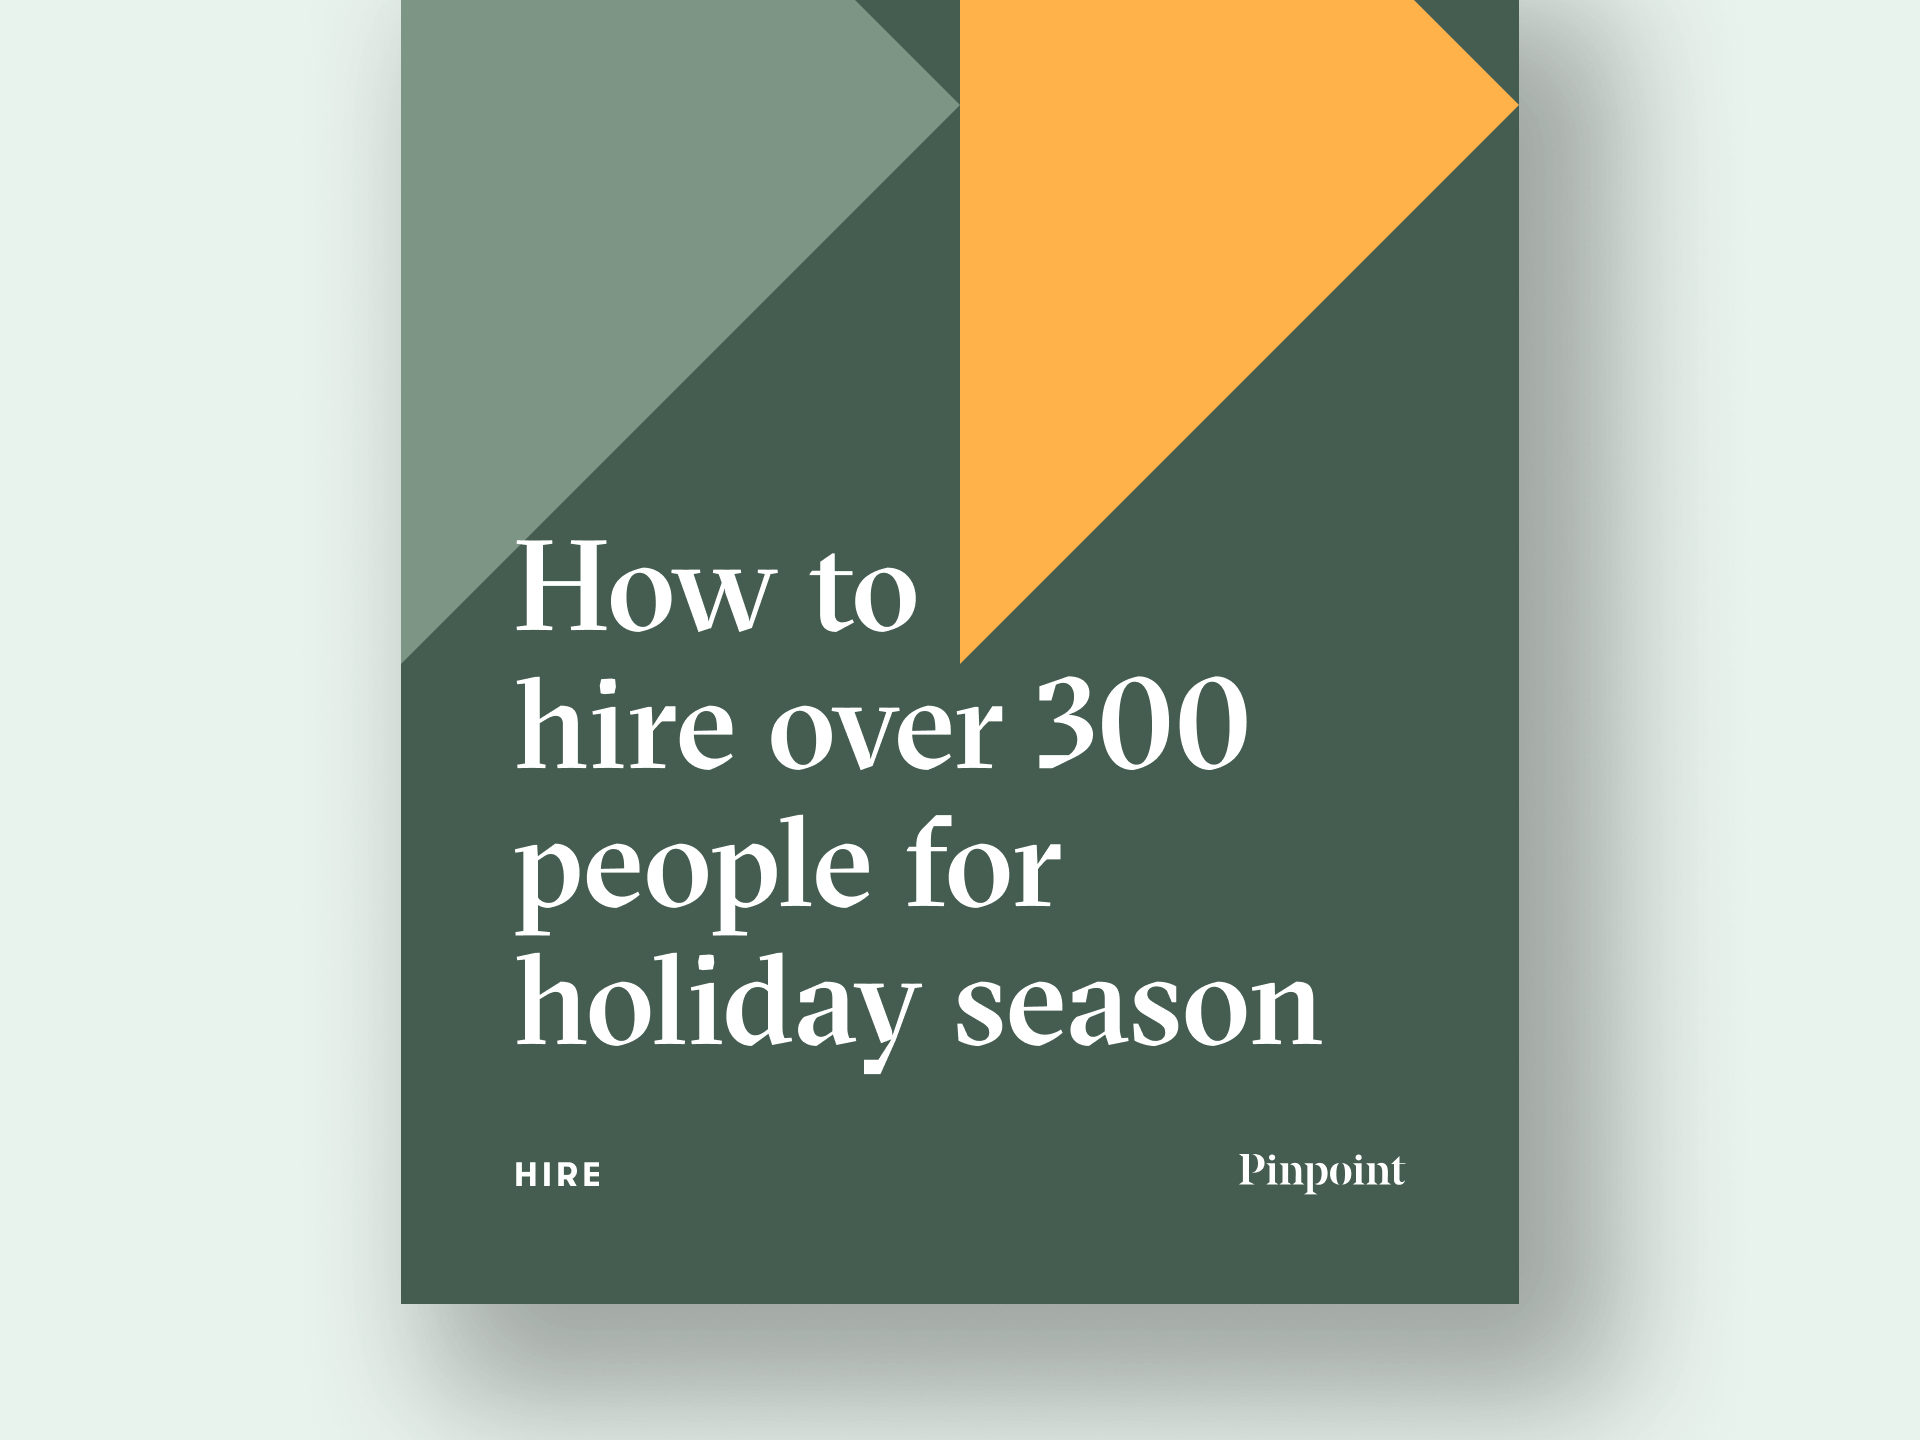 How to hire over 300 new people for holiday season